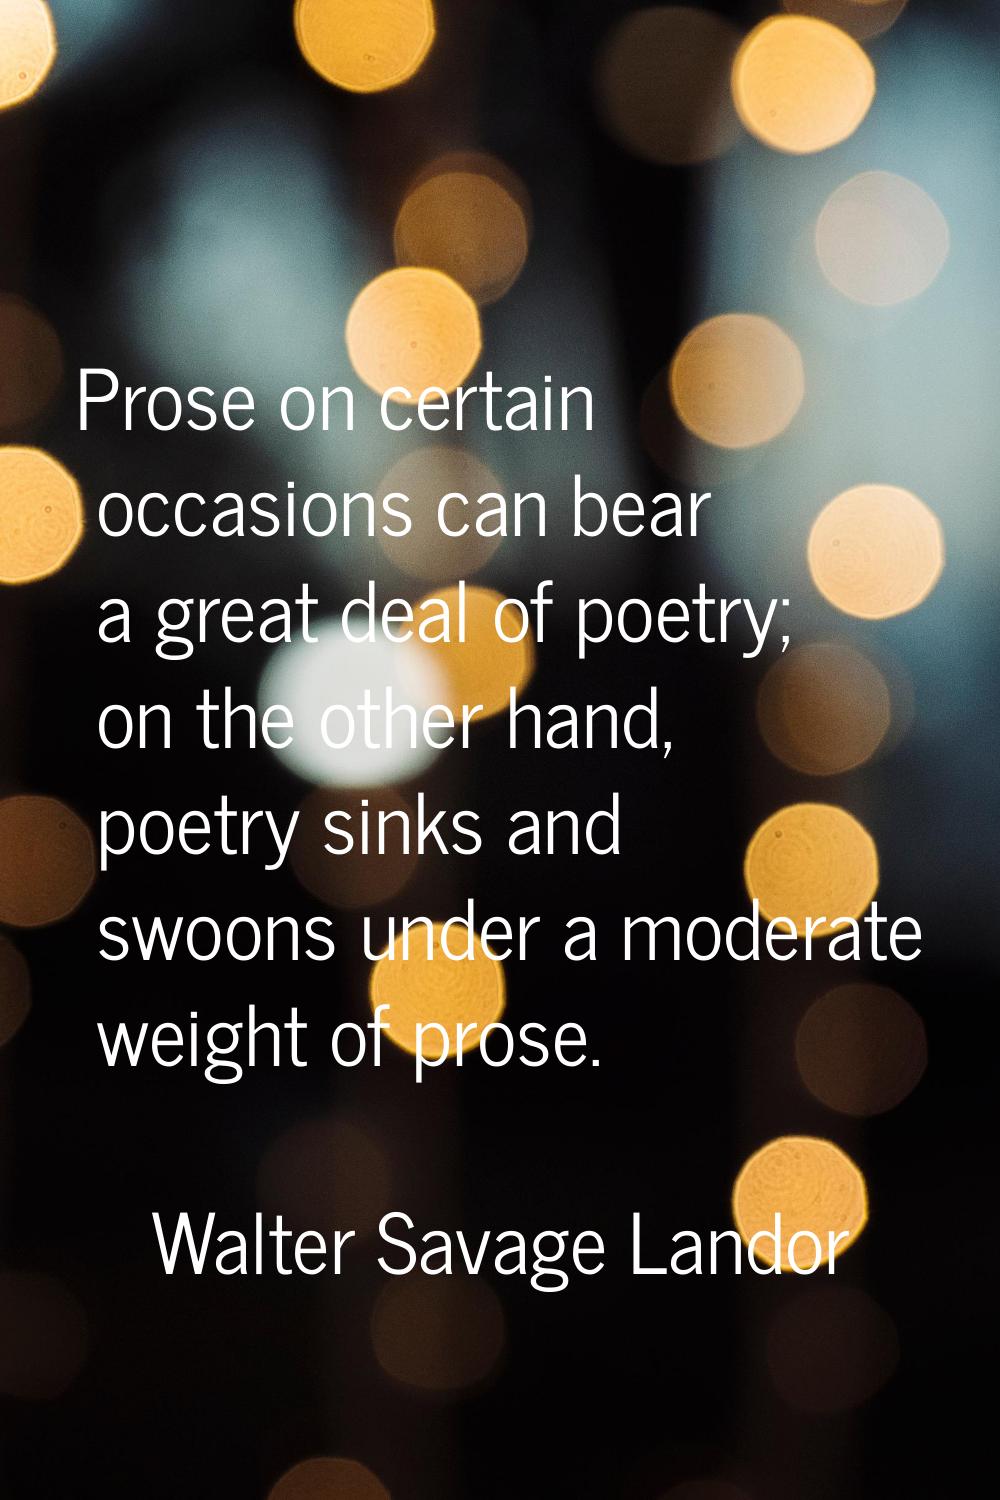 Prose on certain occasions can bear a great deal of poetry; on the other hand, poetry sinks and swo